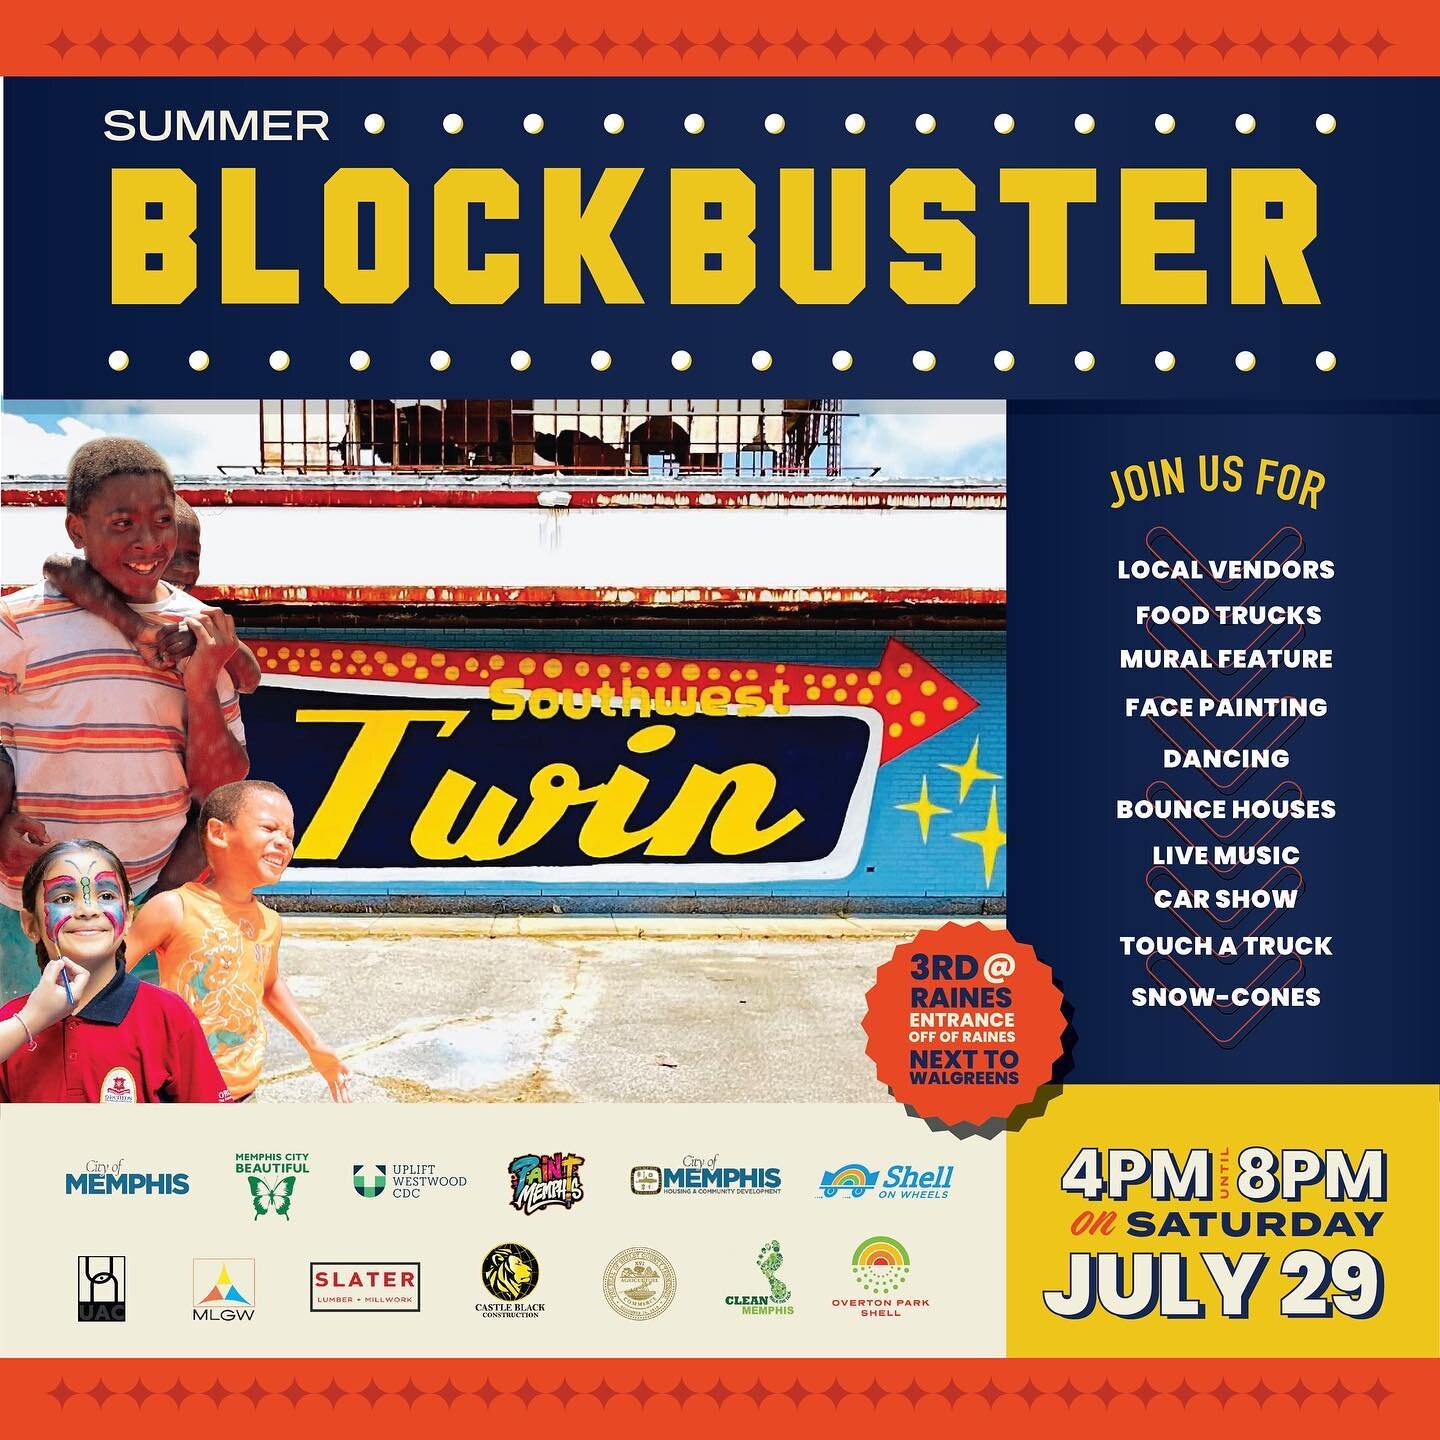 The first party at the former Southwest Twin Drive In is here. Join in for a back-to-school summer block party, featuring live music, a mural unveiling, car show, community expo, food trucks, bounce houses, touch a truck, and more. See you there?